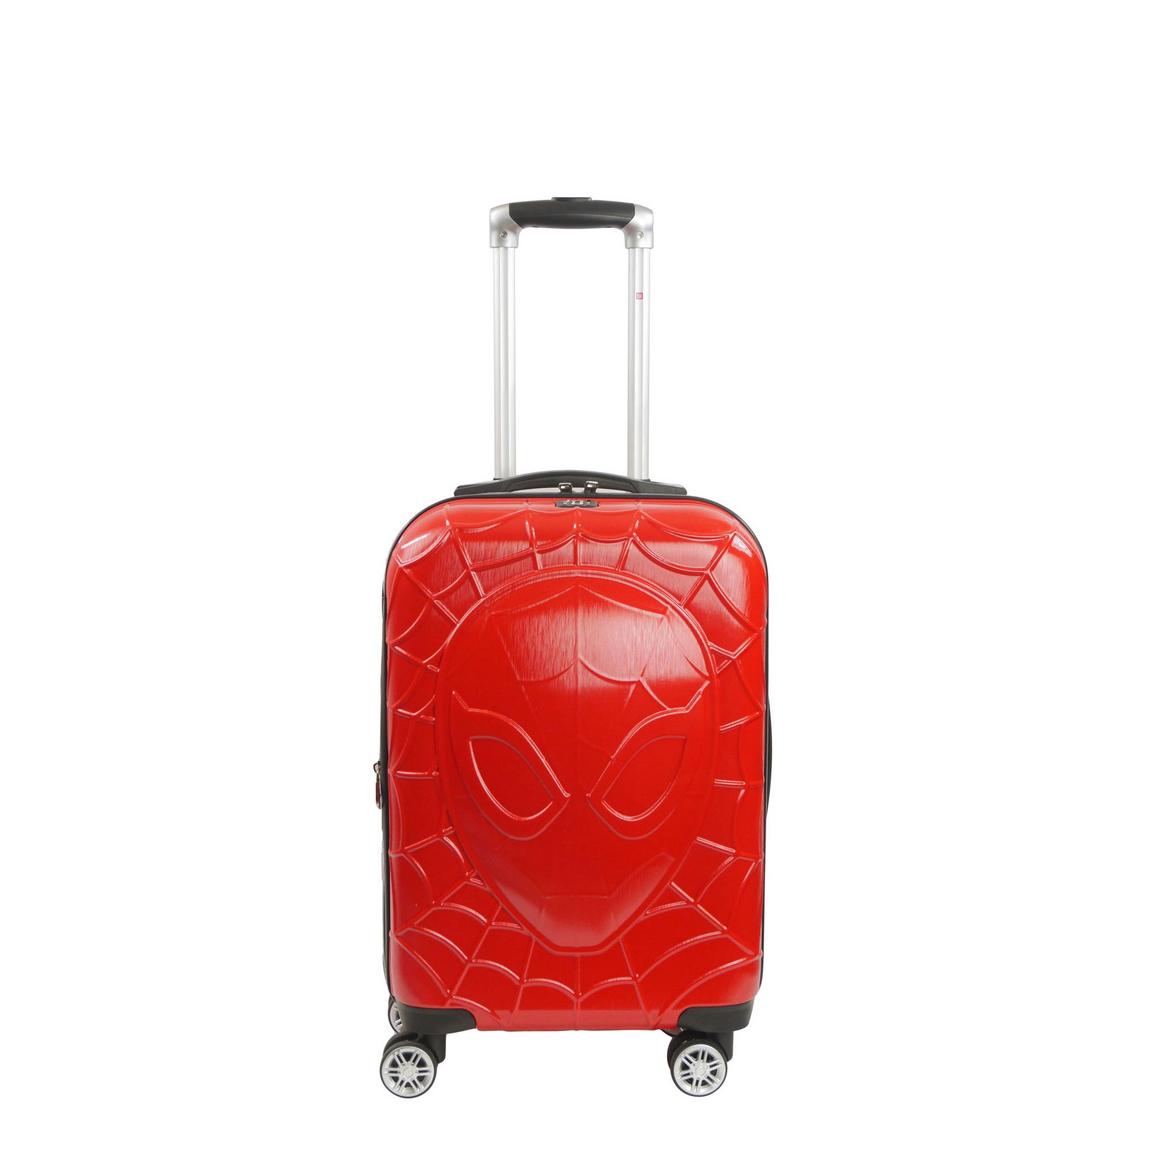 Concept One Marvel Ful Molded Spiderman 8 Wheel Expandable Spinner 21-in Carry-On Hard-Sided Luggage, Red